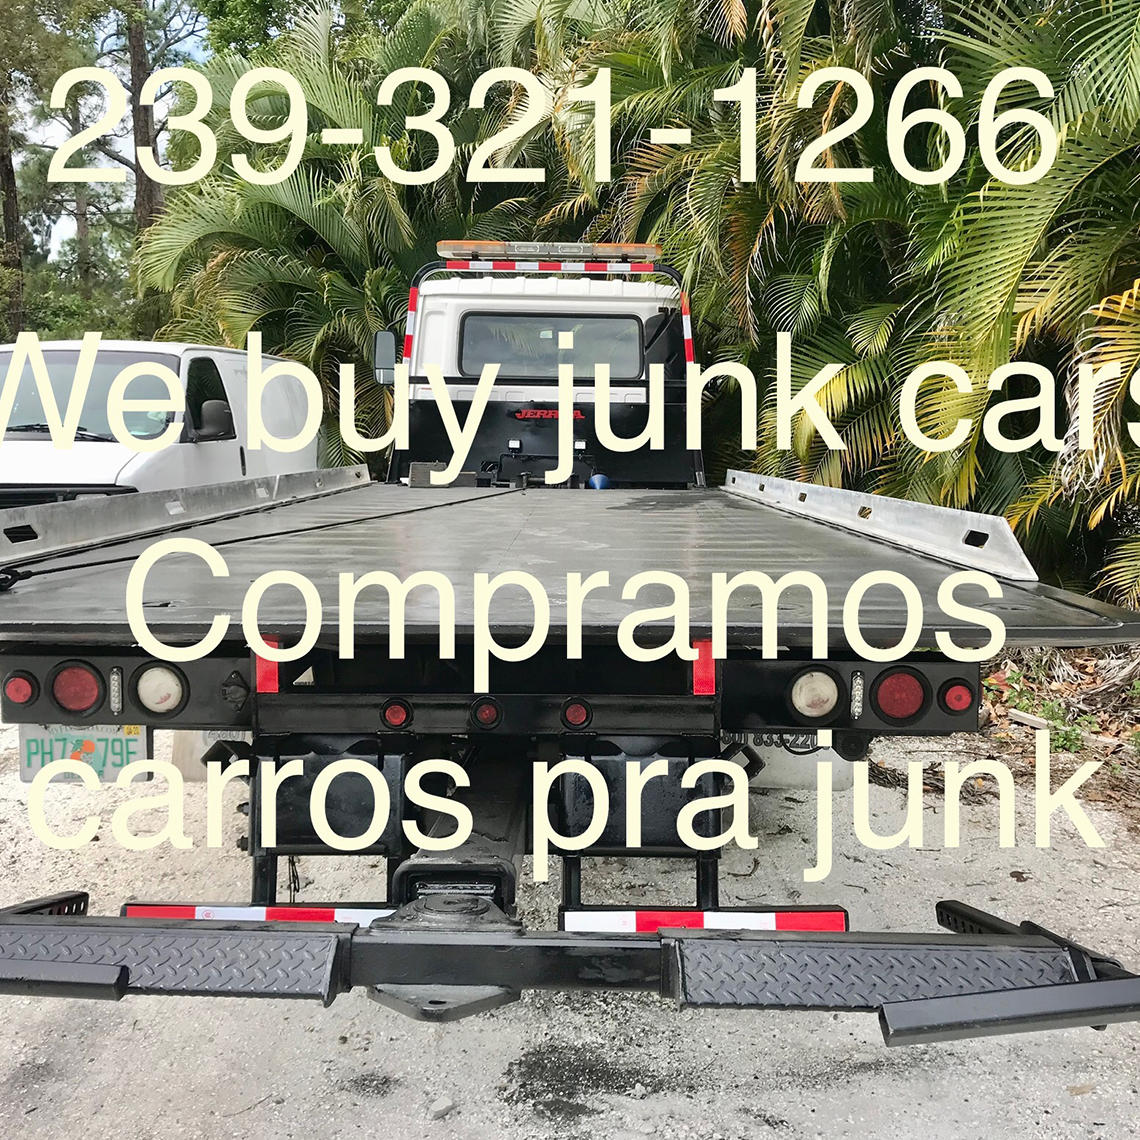 Junk Cars Mike